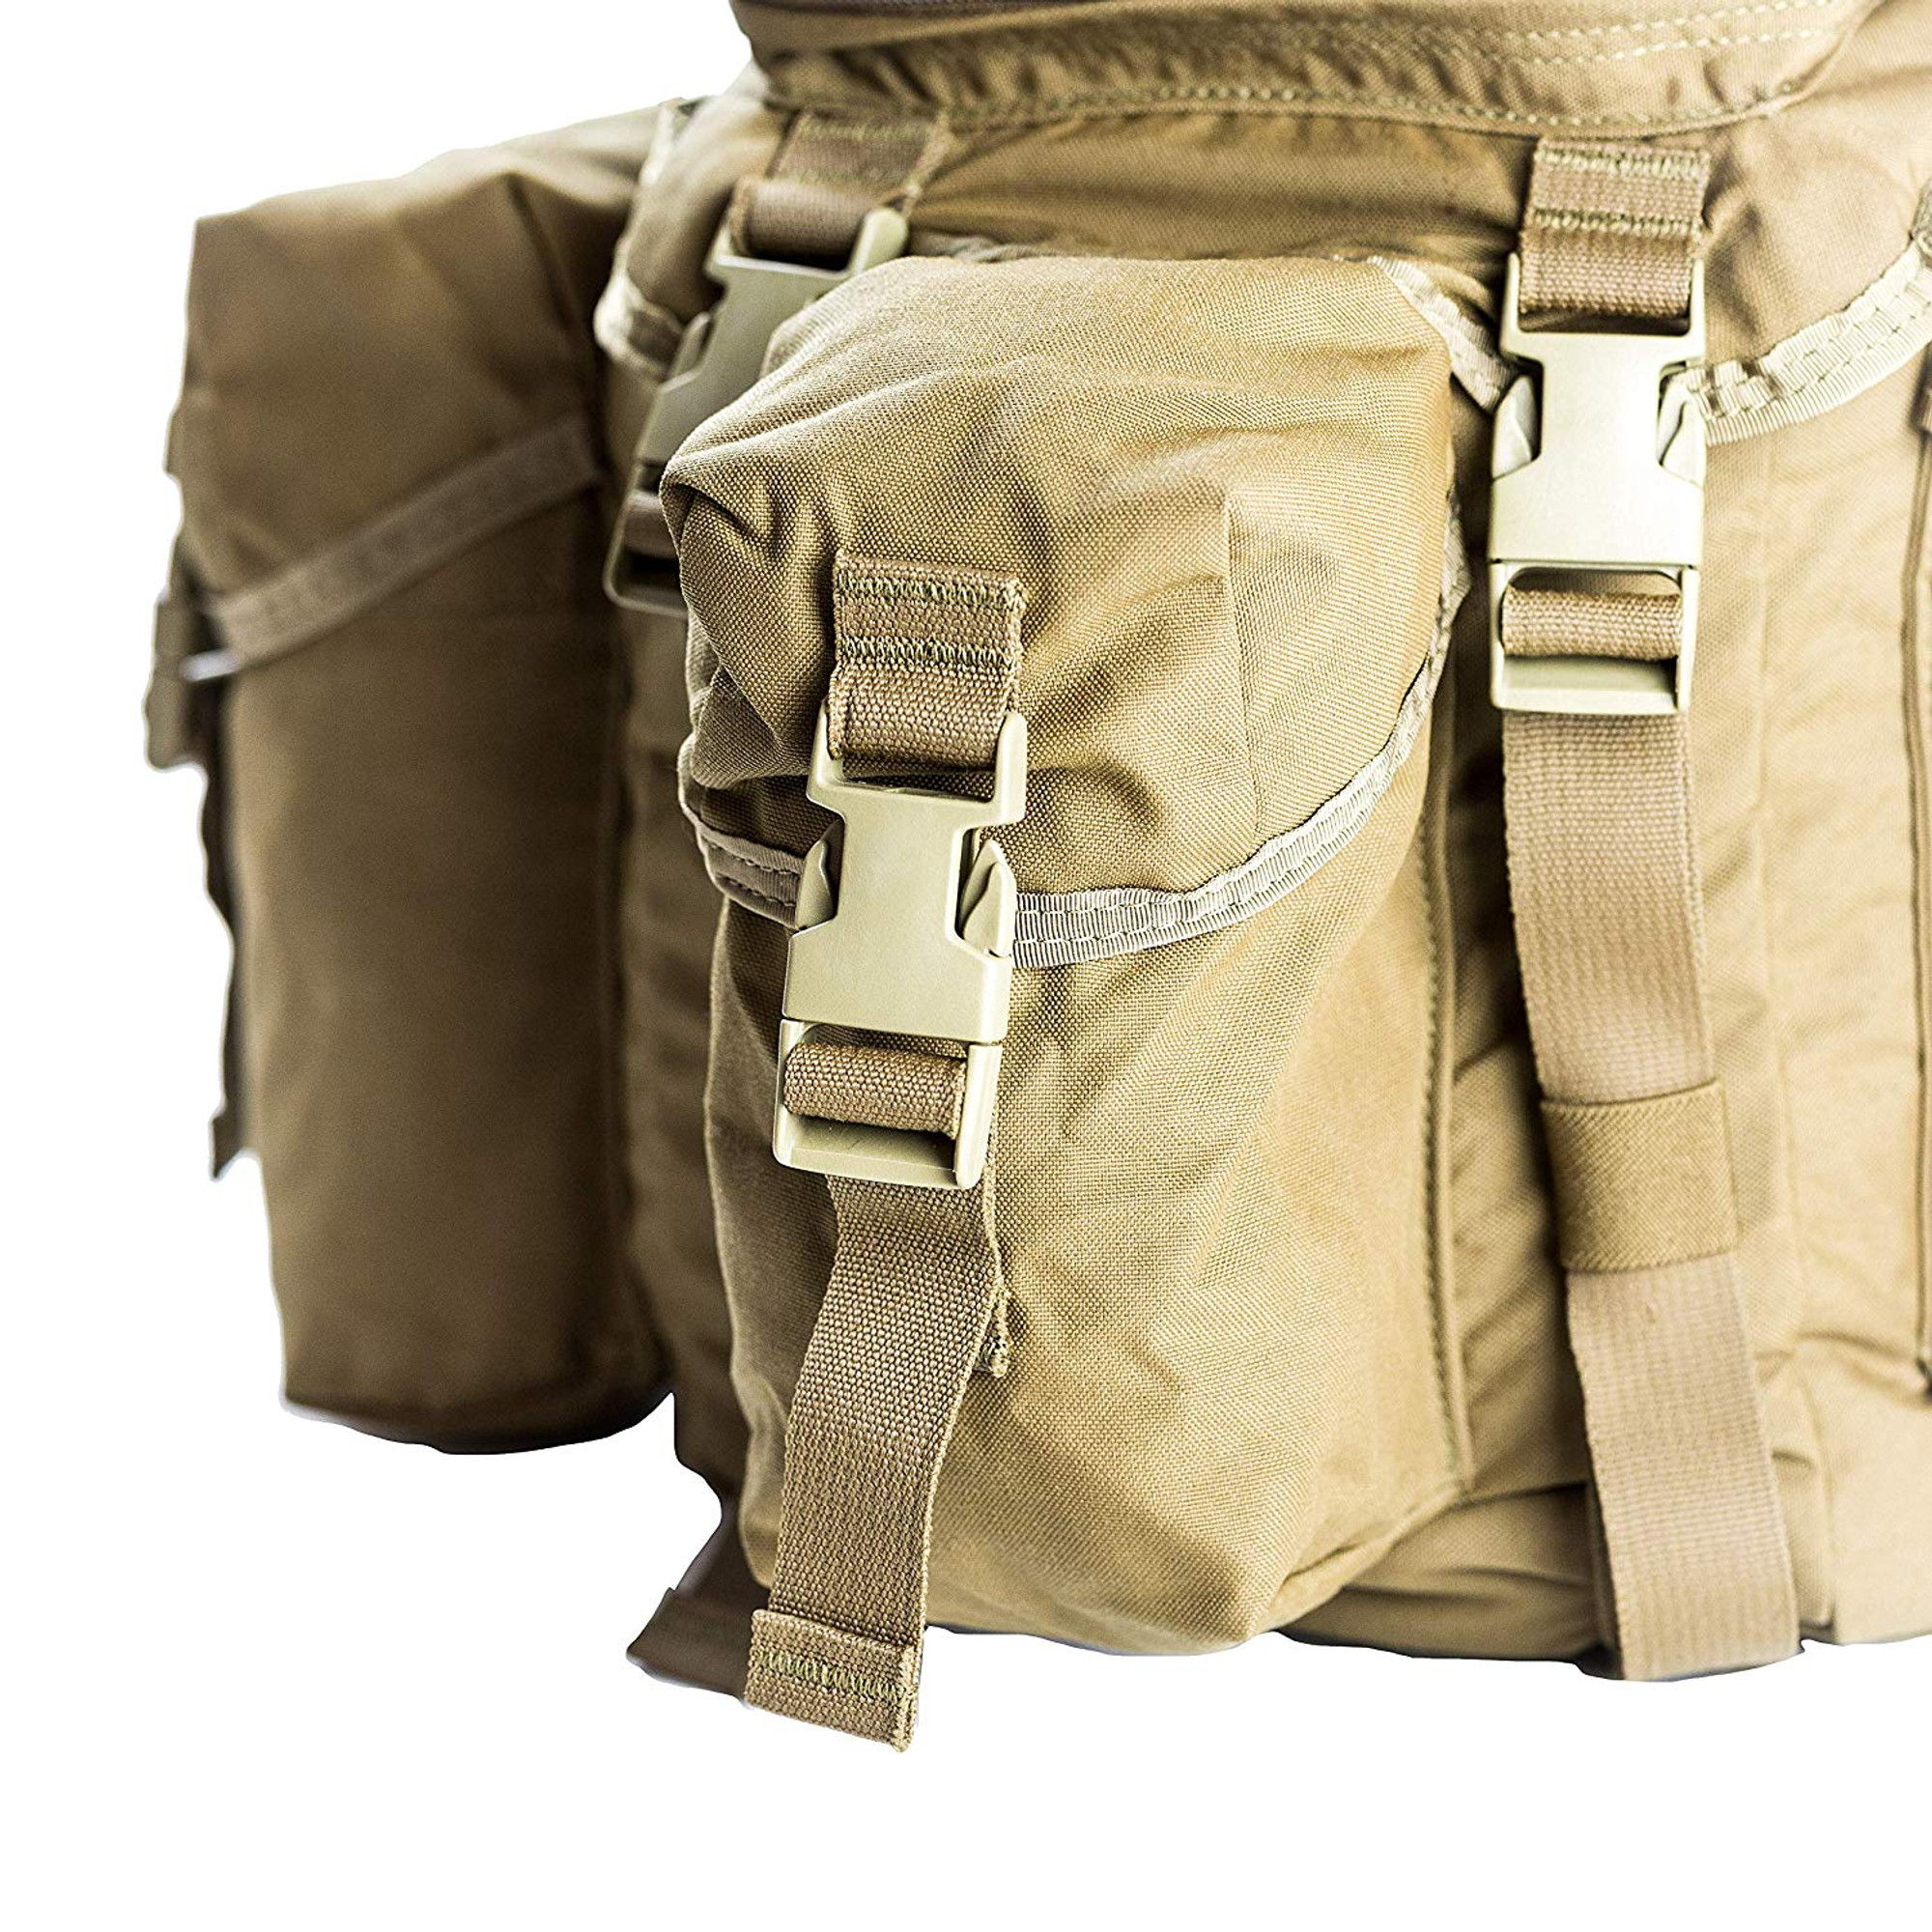 USGI MOLLE BUTT PACK - OVERVIEW/REVIEW 